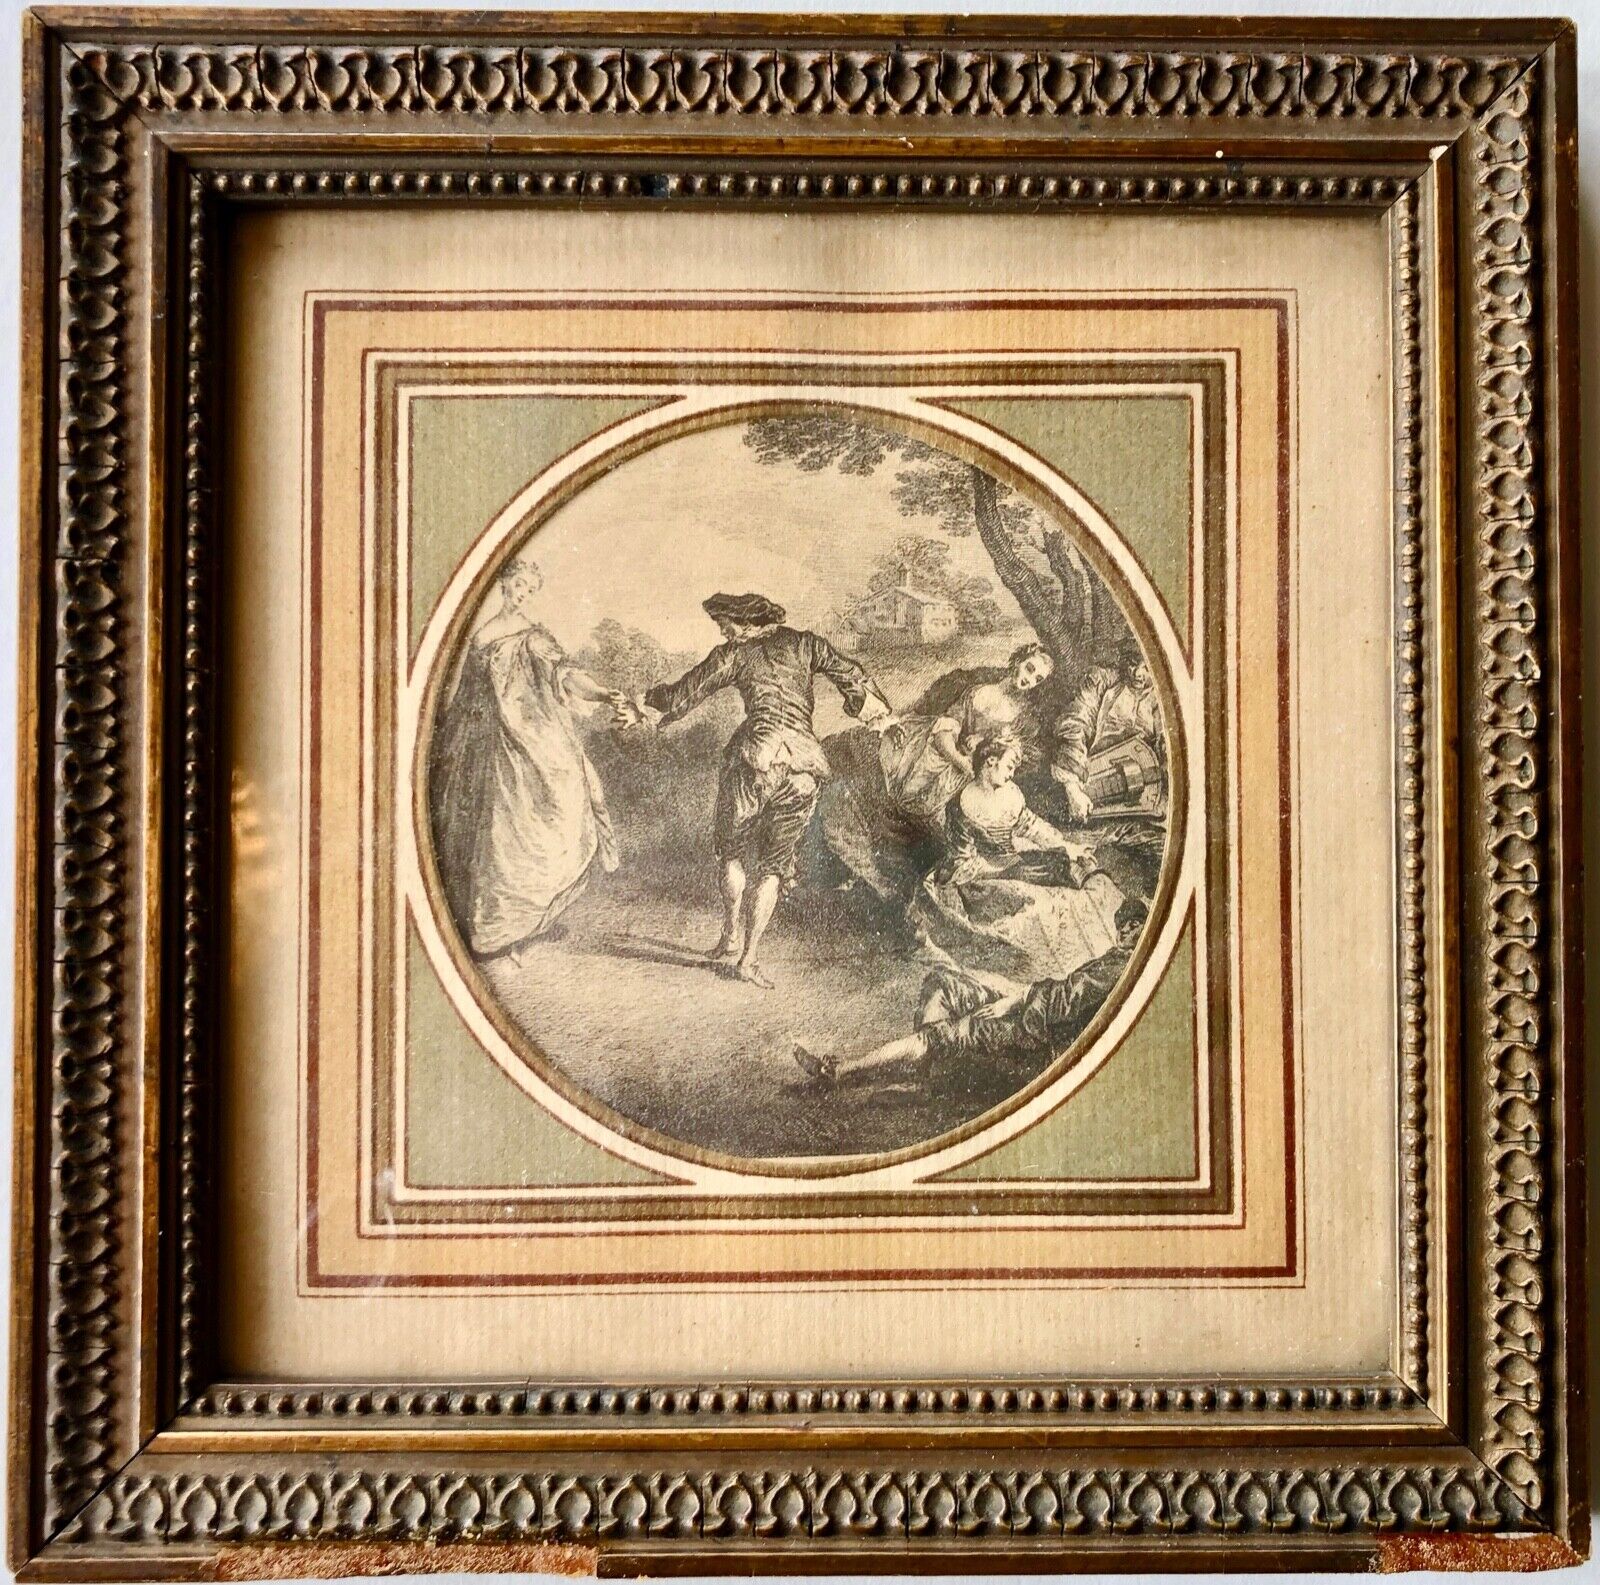 Framed French Late 1800s Engraving of a Romantic Scene in a Garden